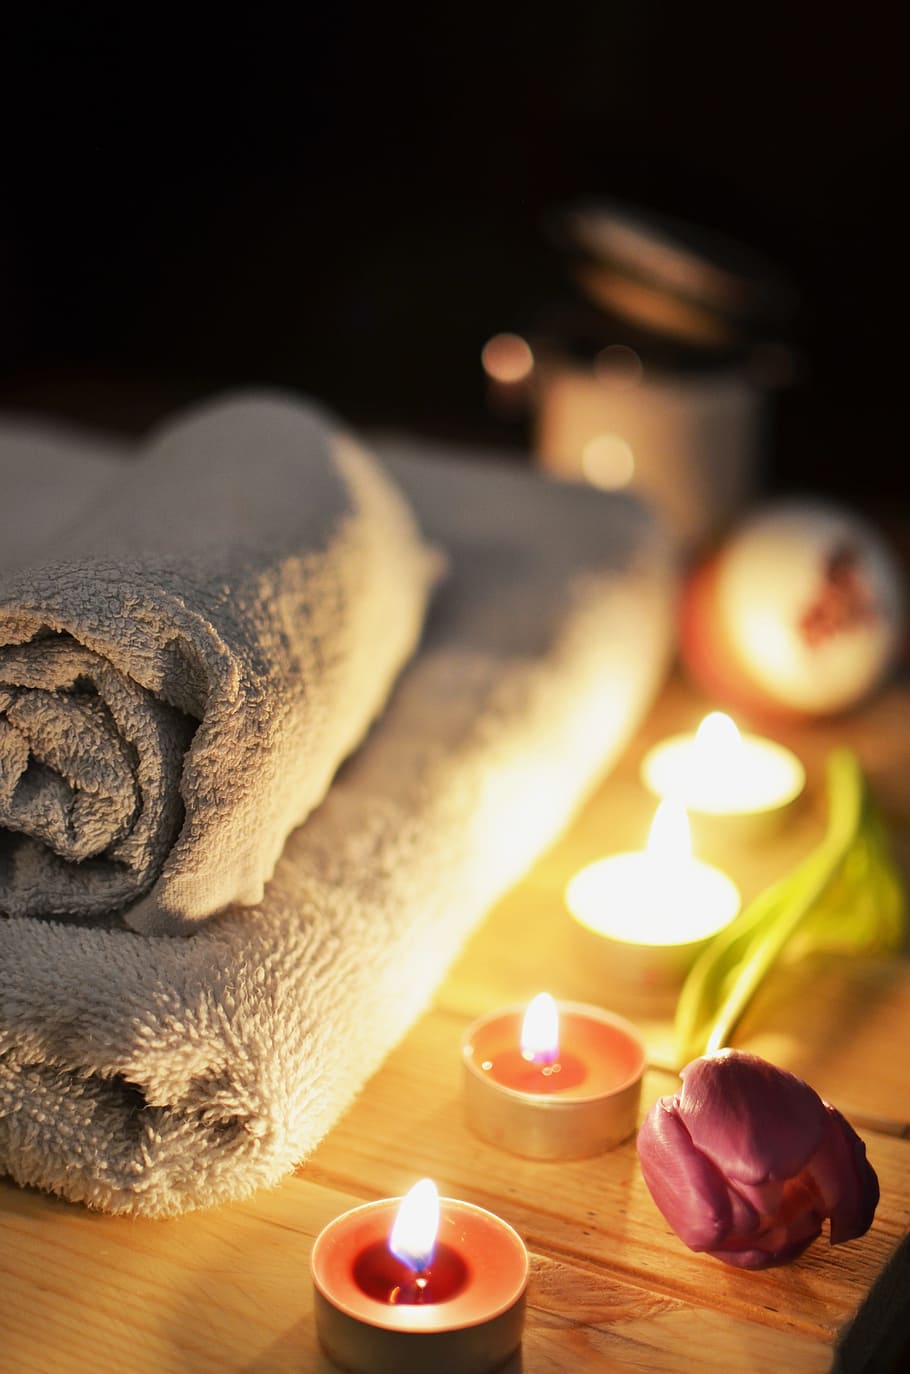 folded bath towel beside four lighted tealights on top of beige wooden table